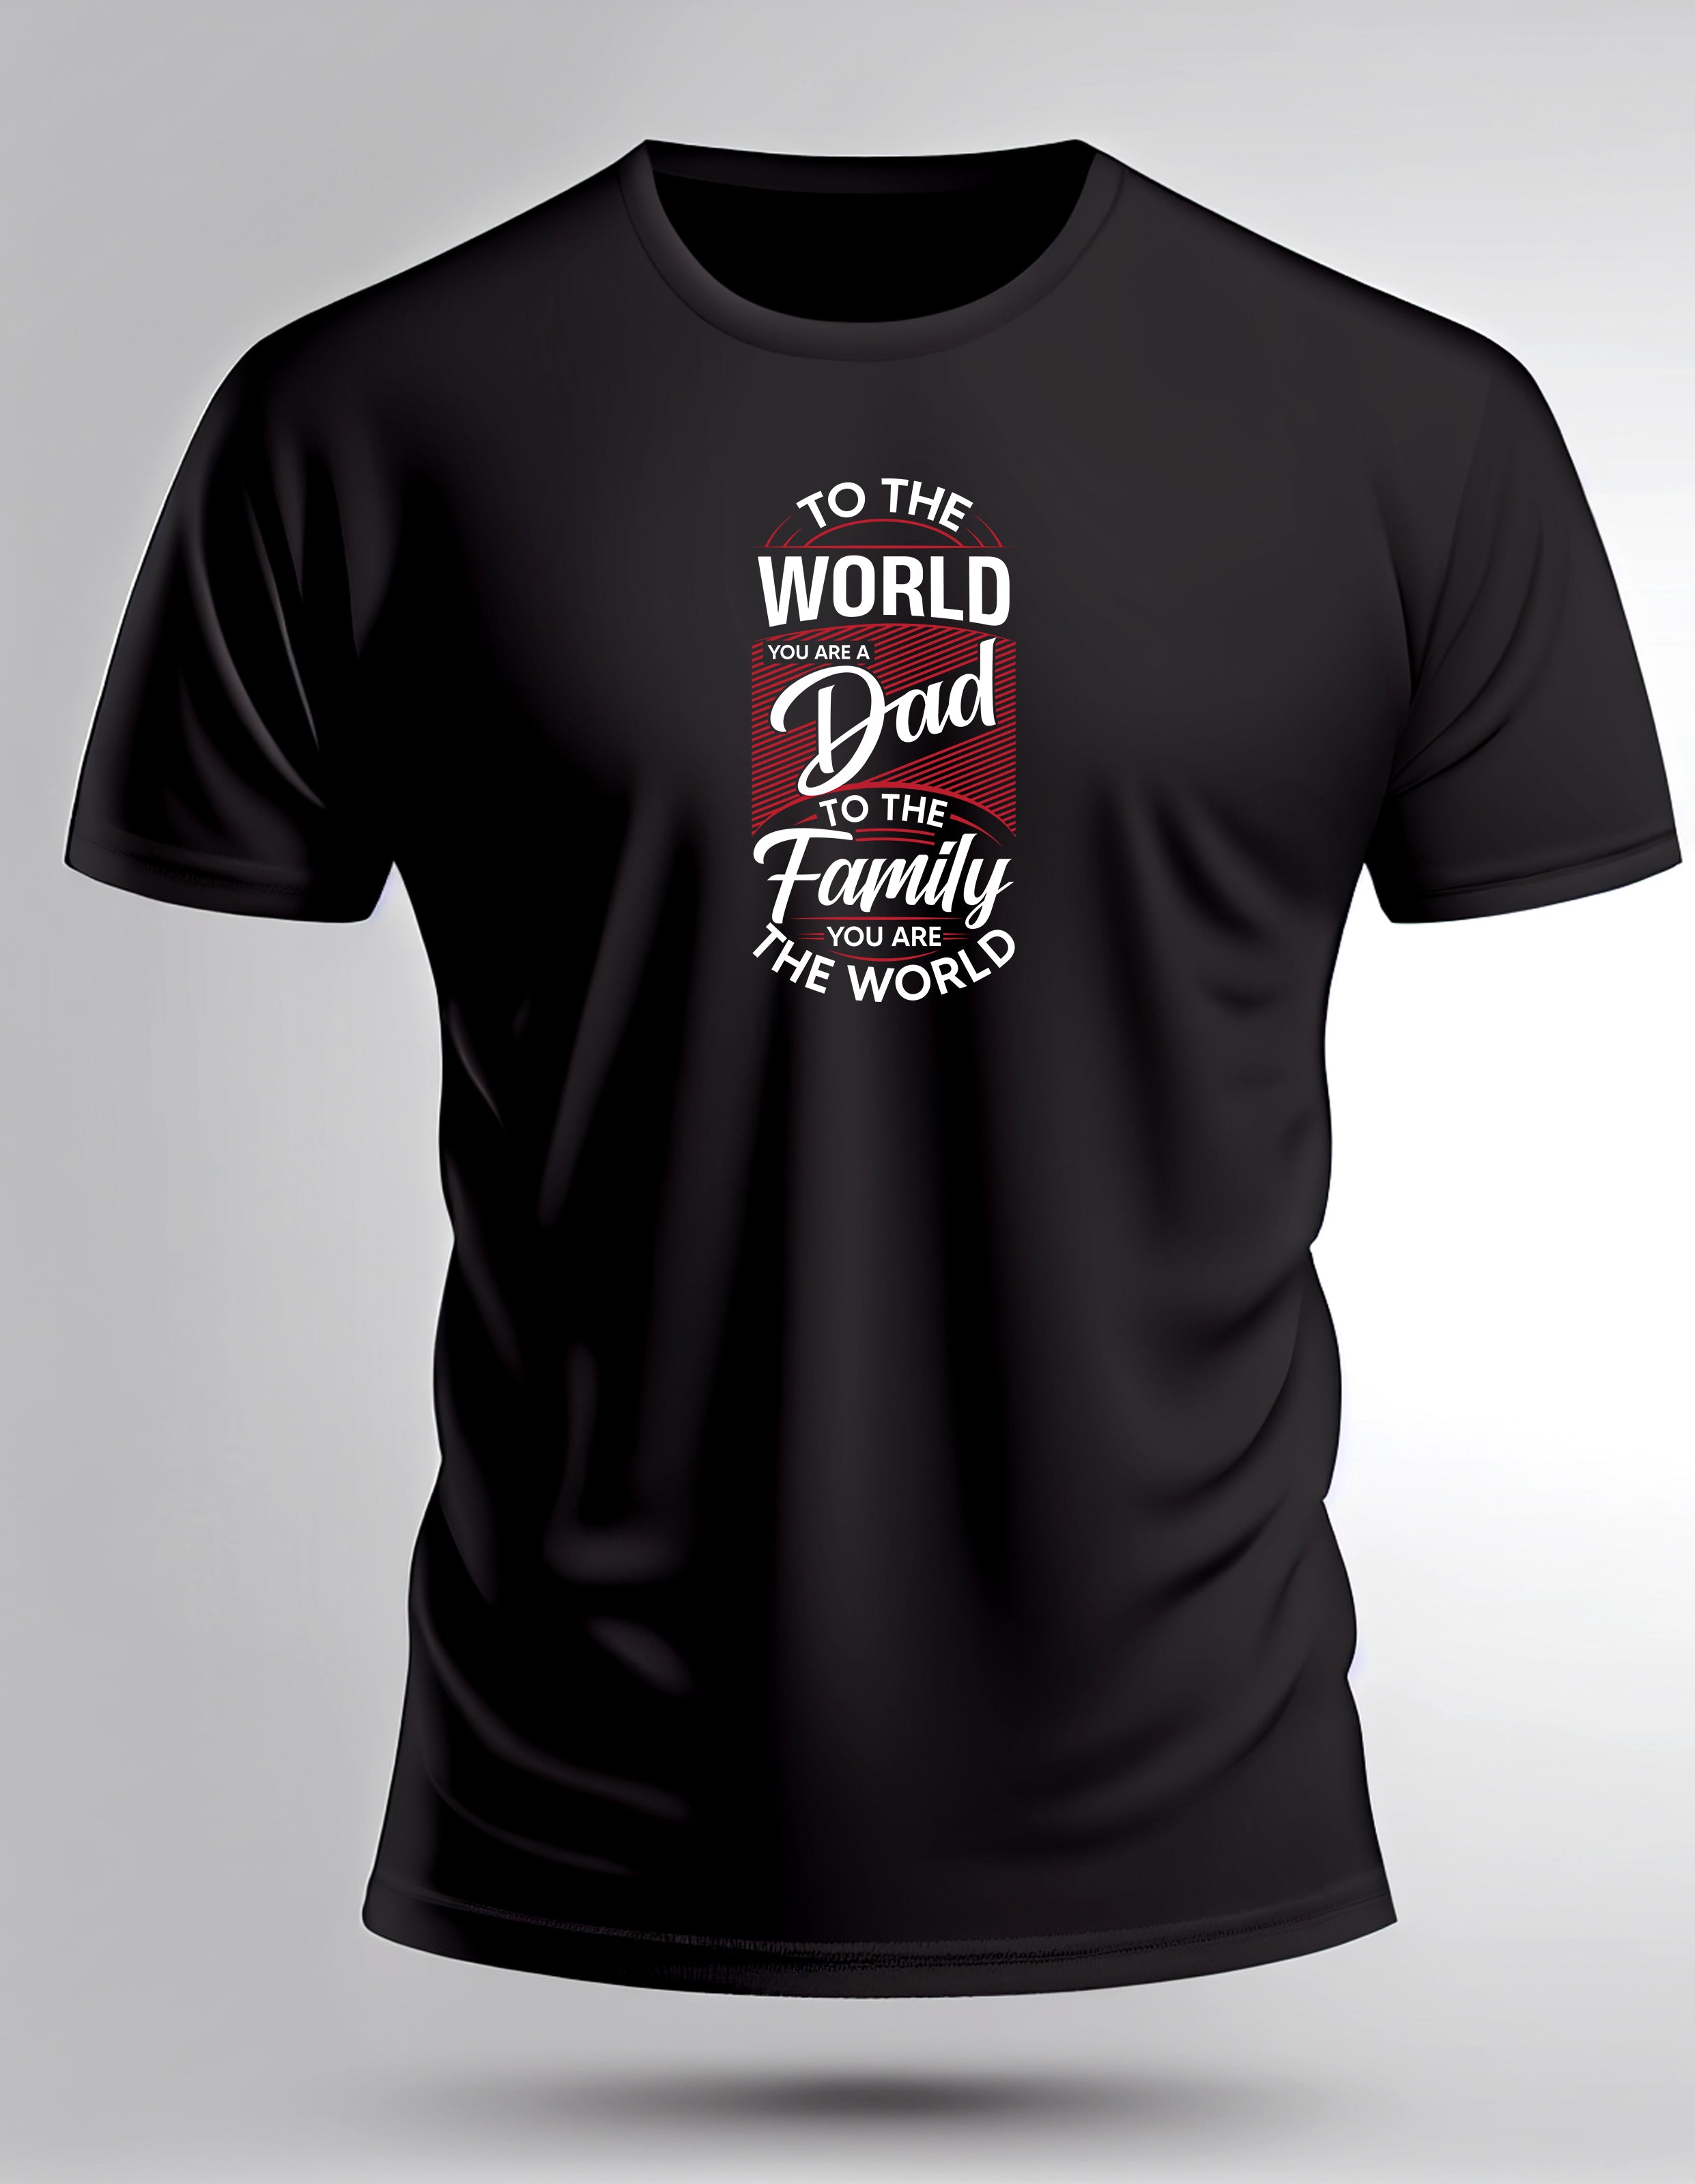 To The World You Are a Dad to The Family You Are The World T Shirt